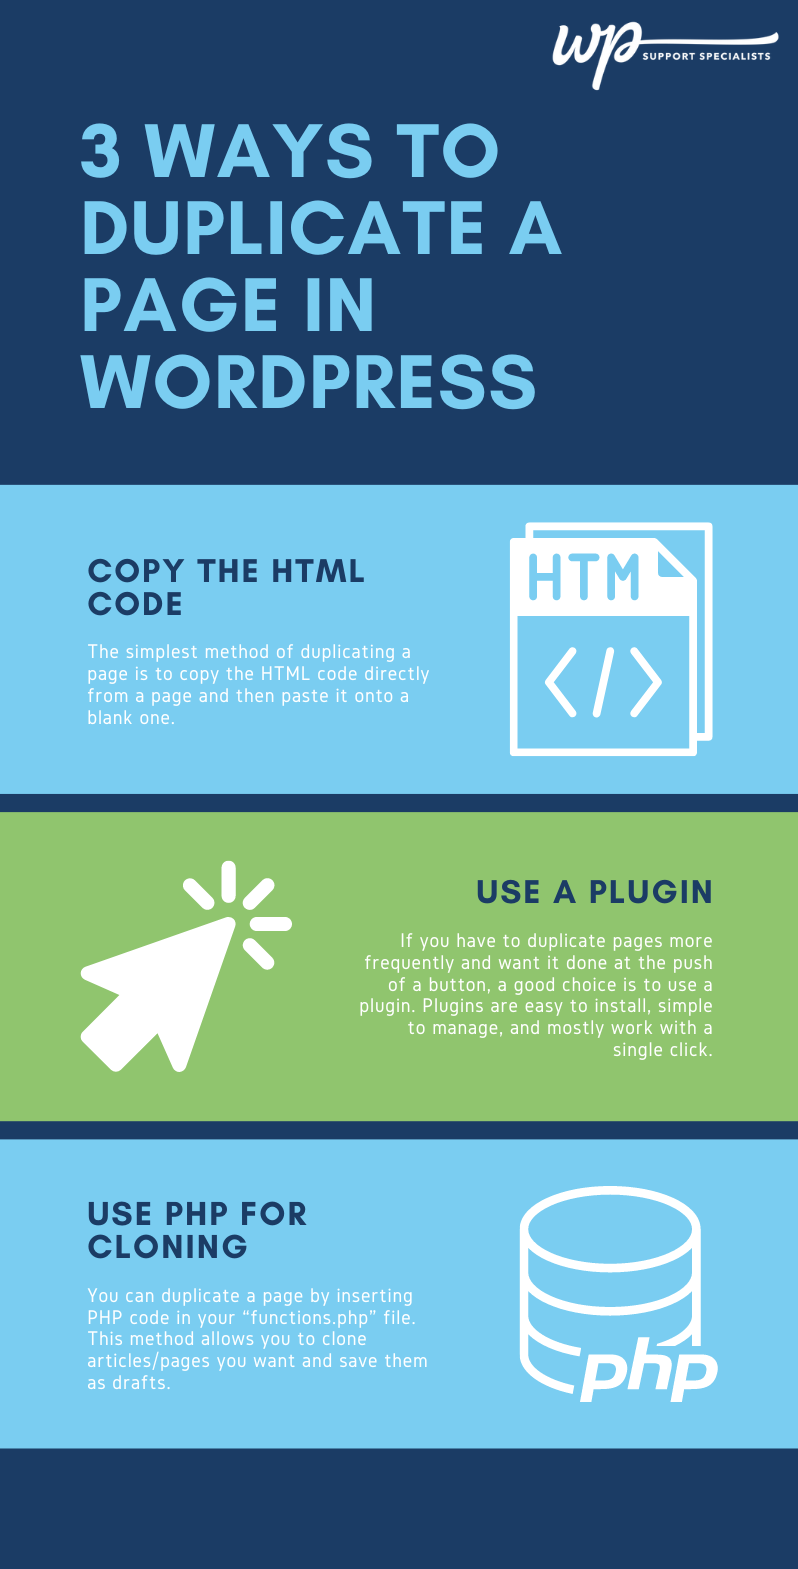 Duplicate a Page in WordPress Infographic